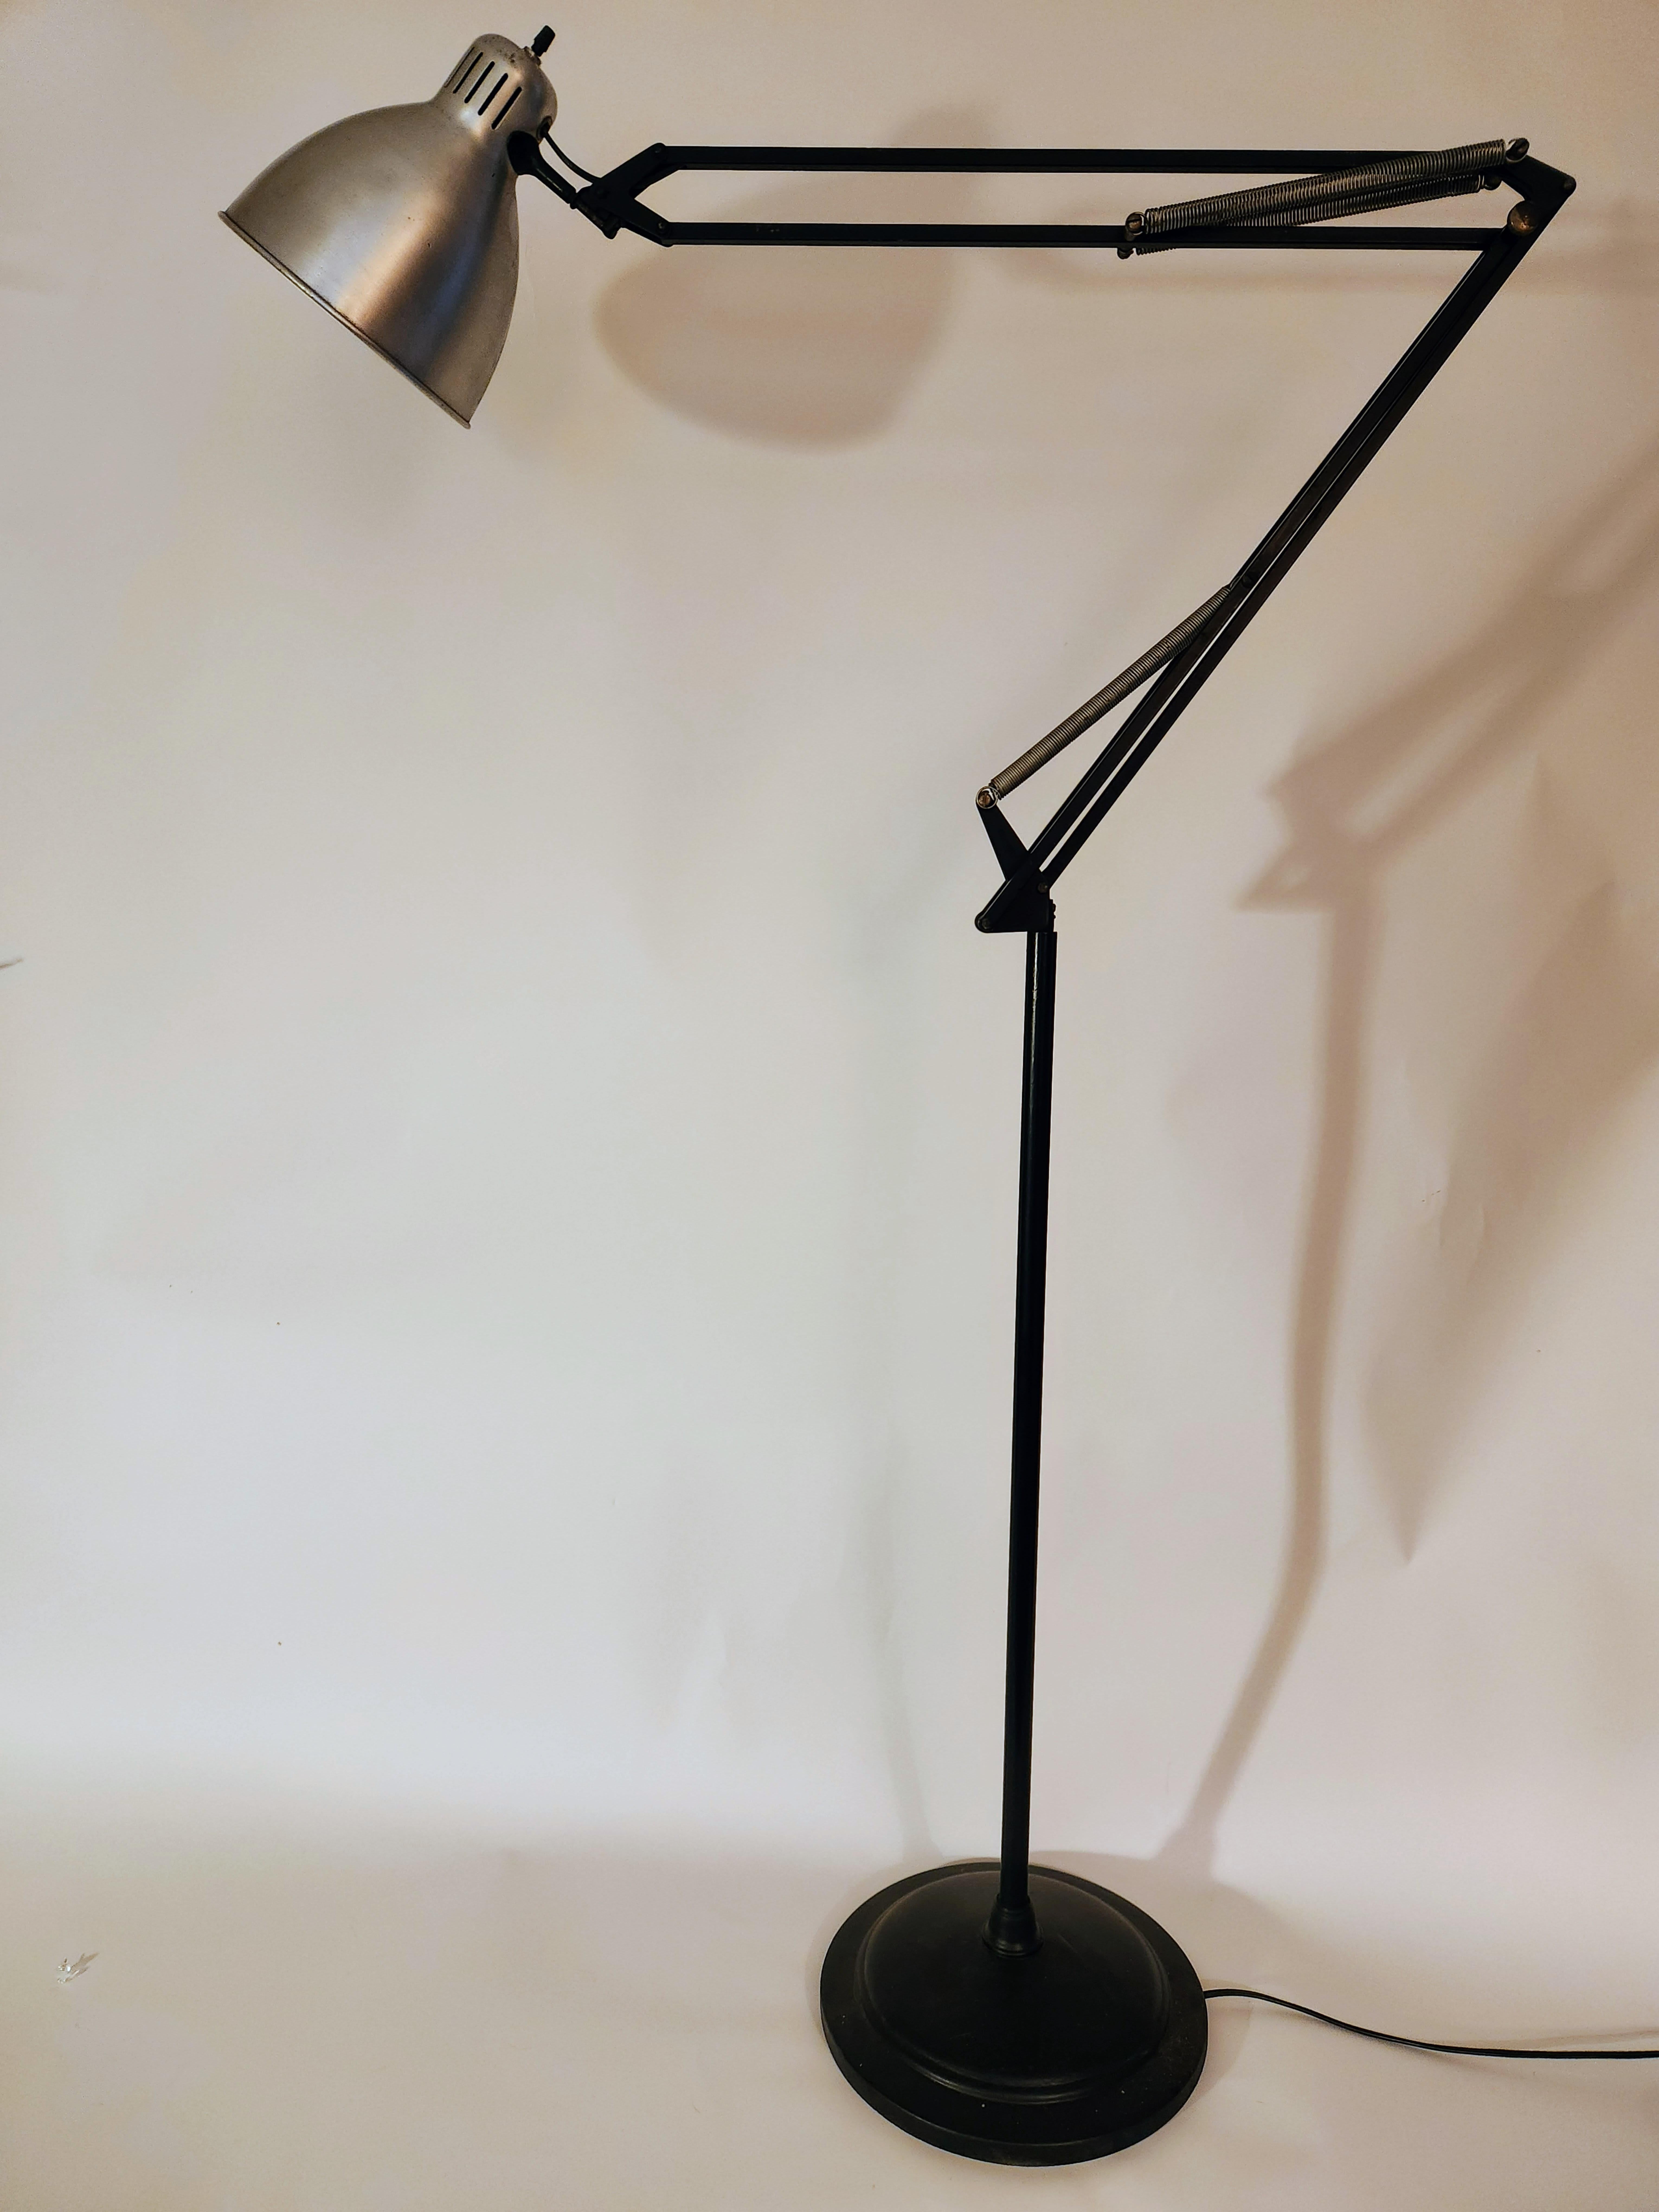 Jacob Jacobsen iconic L-1 floor lamp manufactured in Norway.
The design date is 1937 and this lamp was made in the early 1950s.
Classic European lighting.
In good vintage condition.